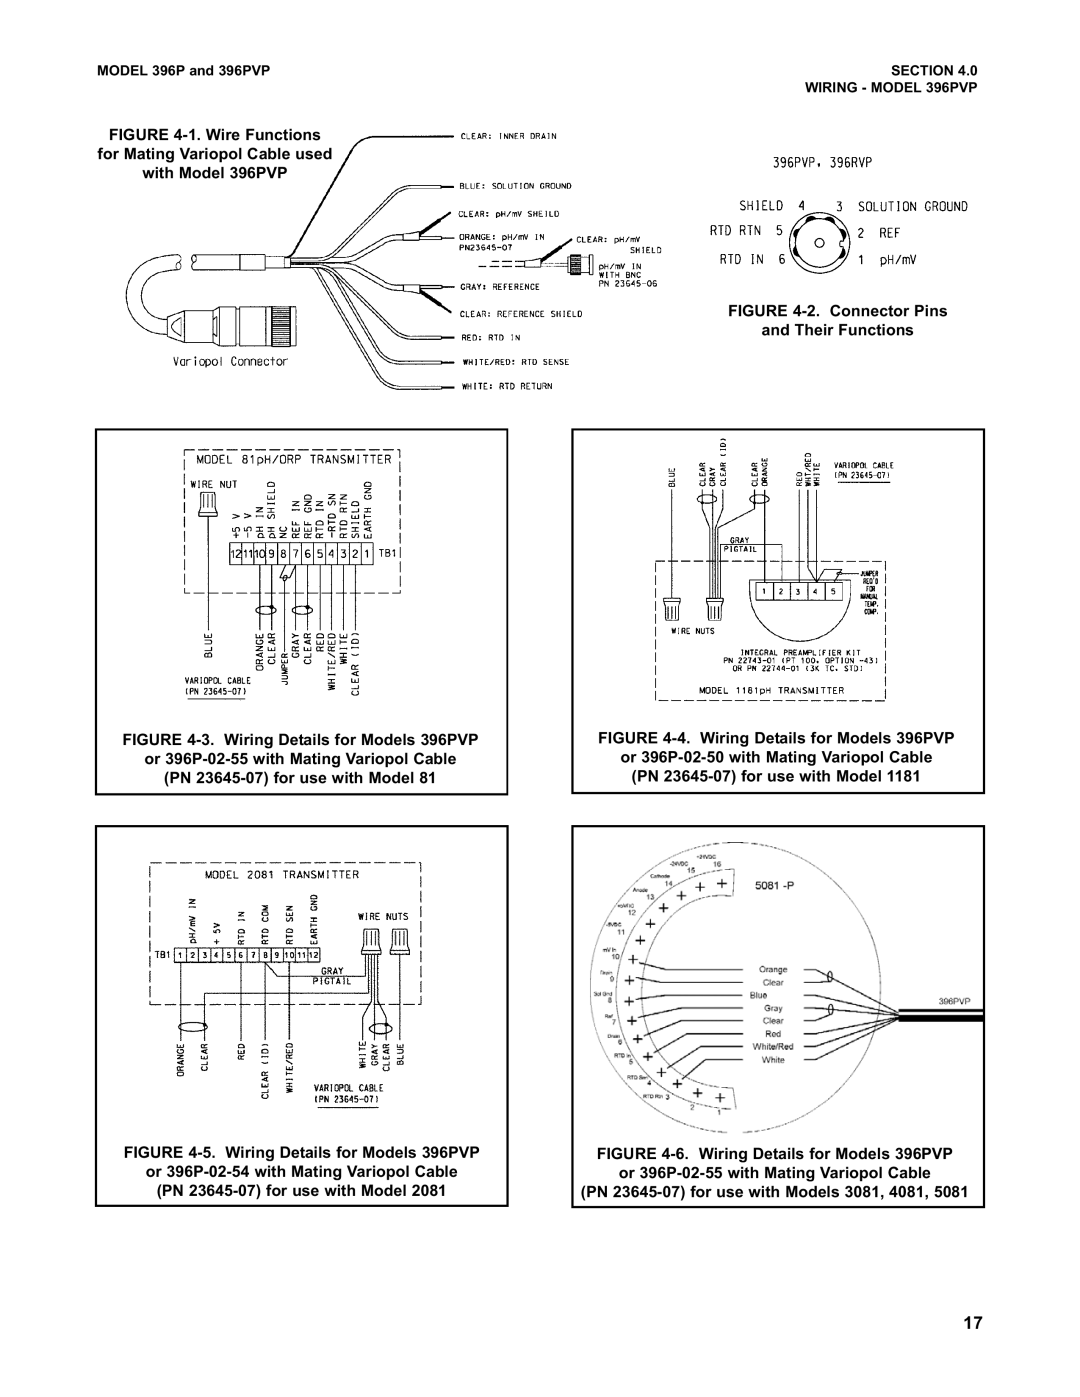 Emerson Process Management instruction manual 3.Wiring Details for Models 396PVP 